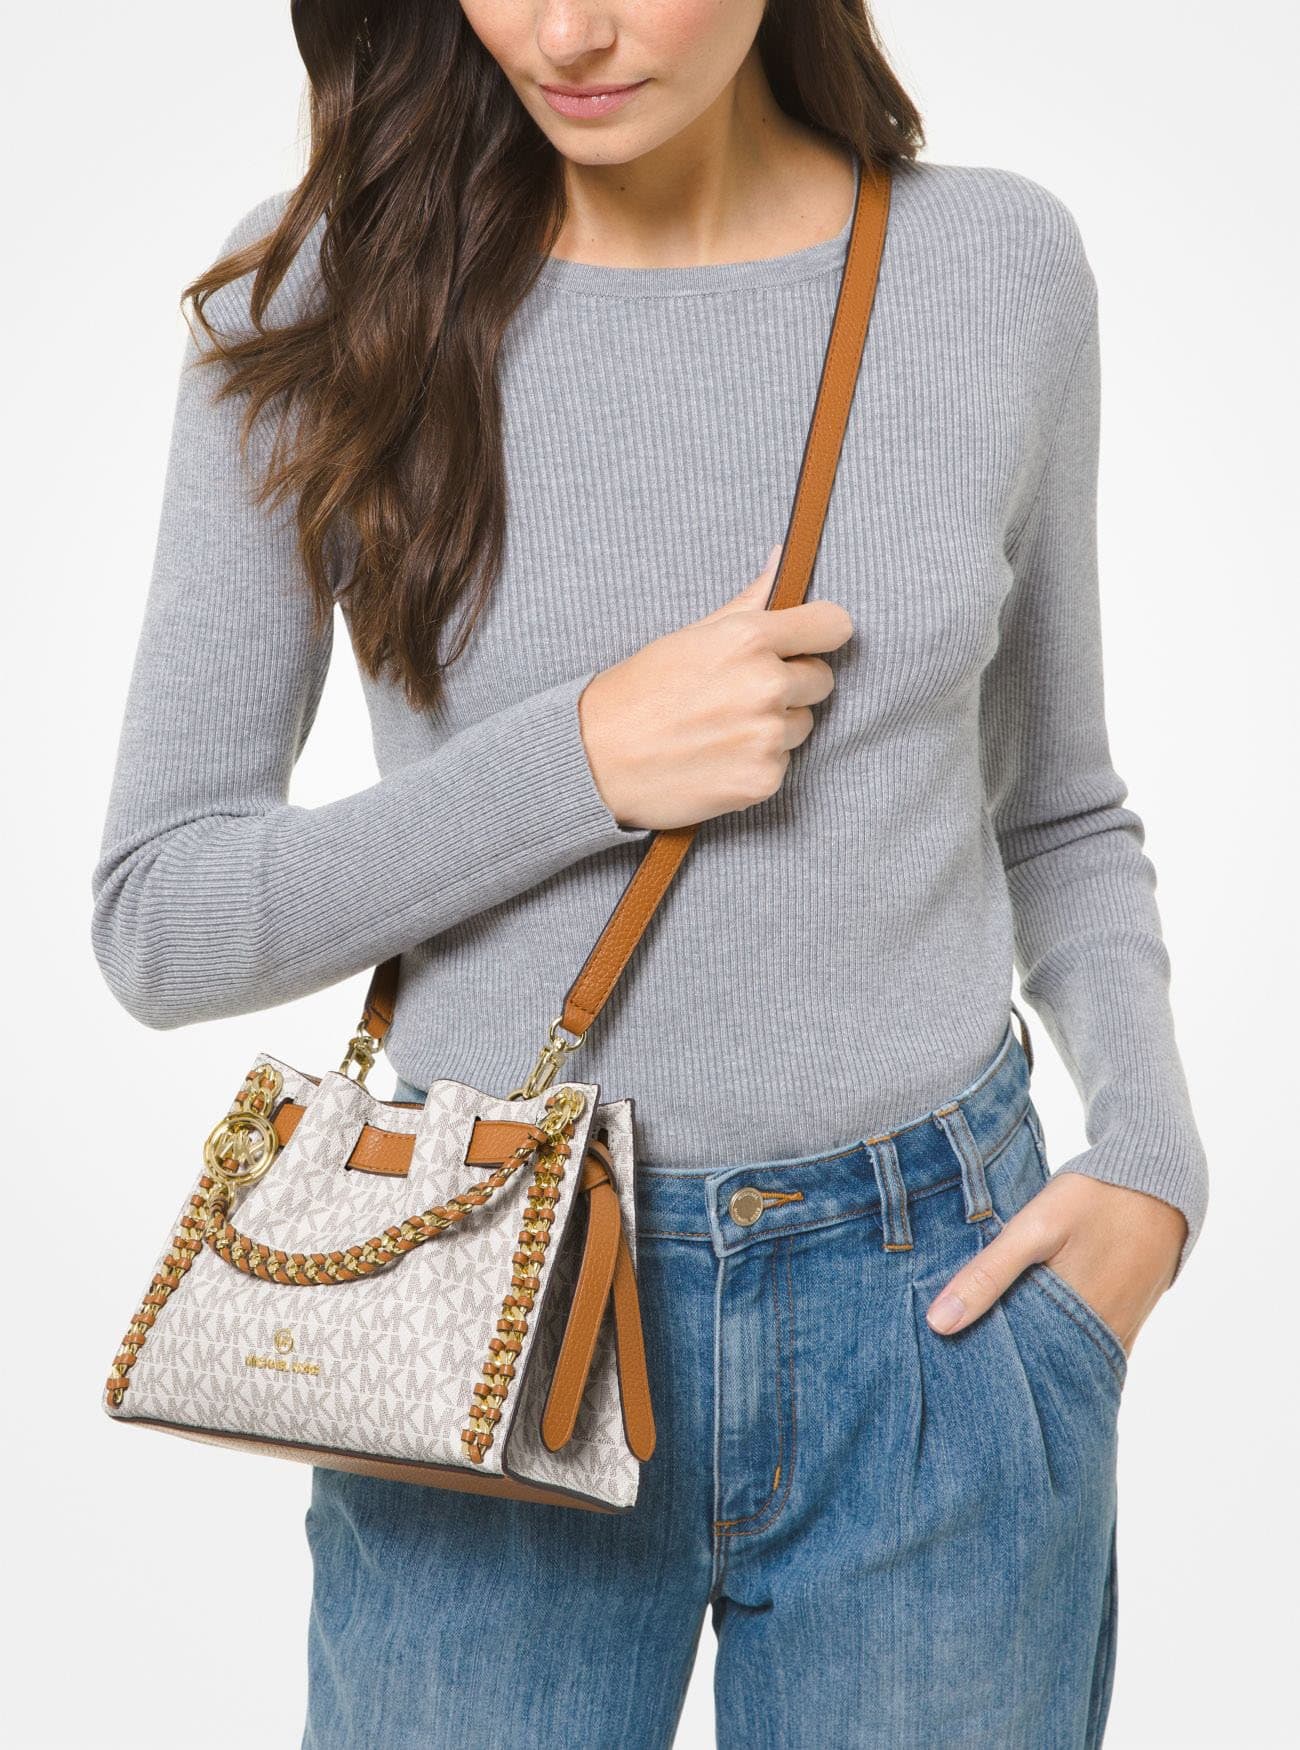 Carry it using the braided leather-and-chain top handles or the adjustable crossbody strap